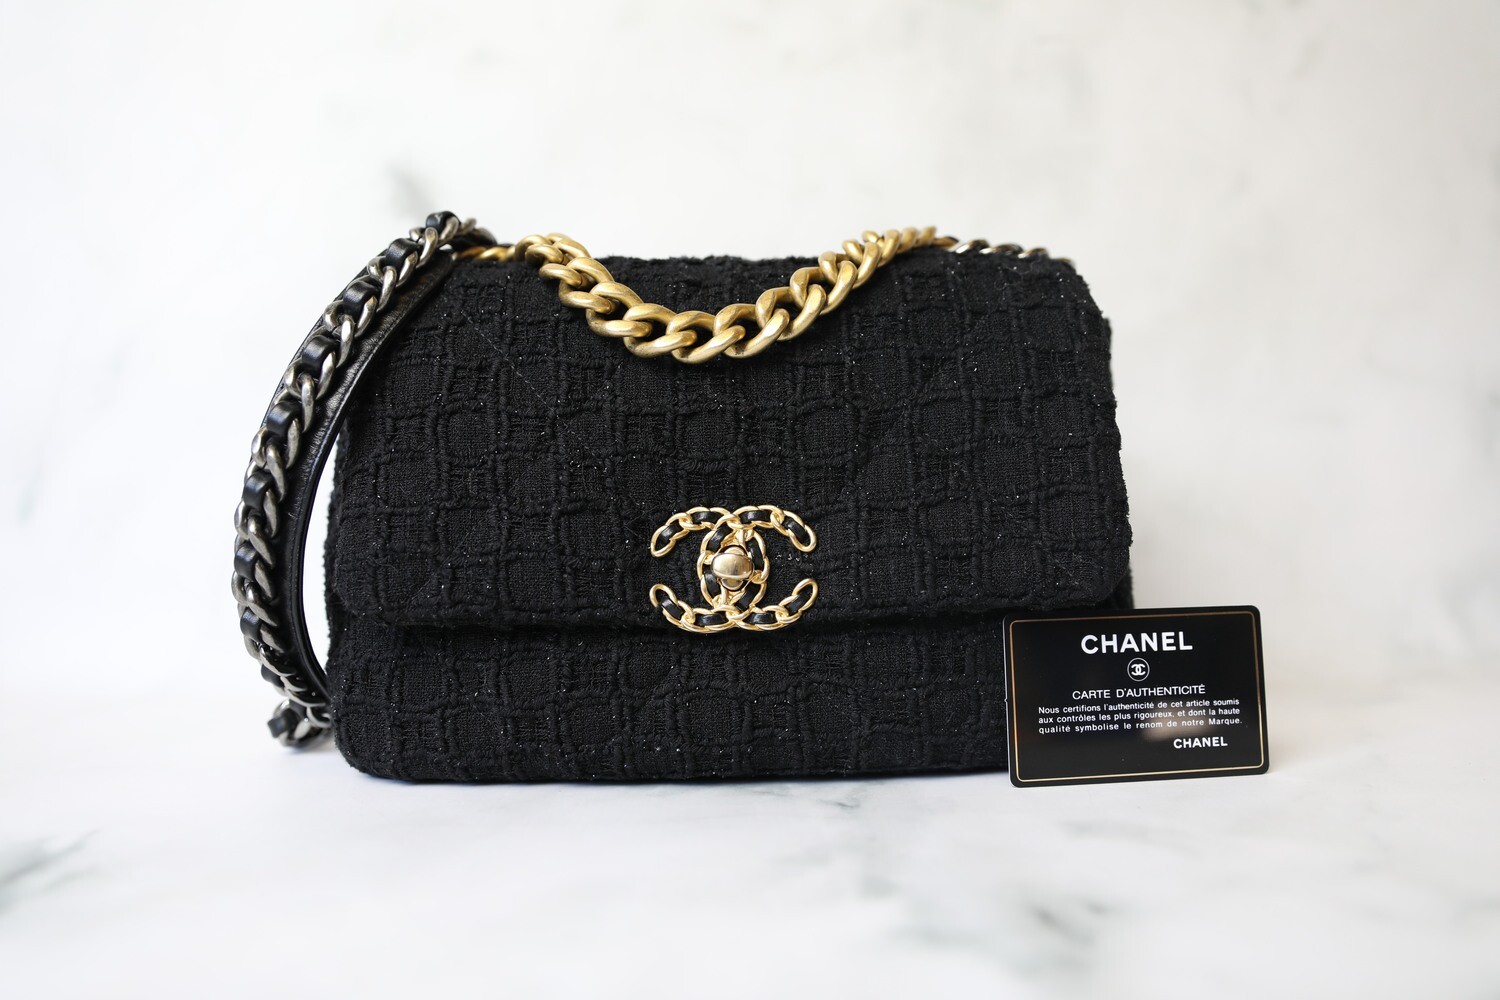 Chanel 19 Small Tweed Black Beige Mixed Hardware – Coco Approved Studio